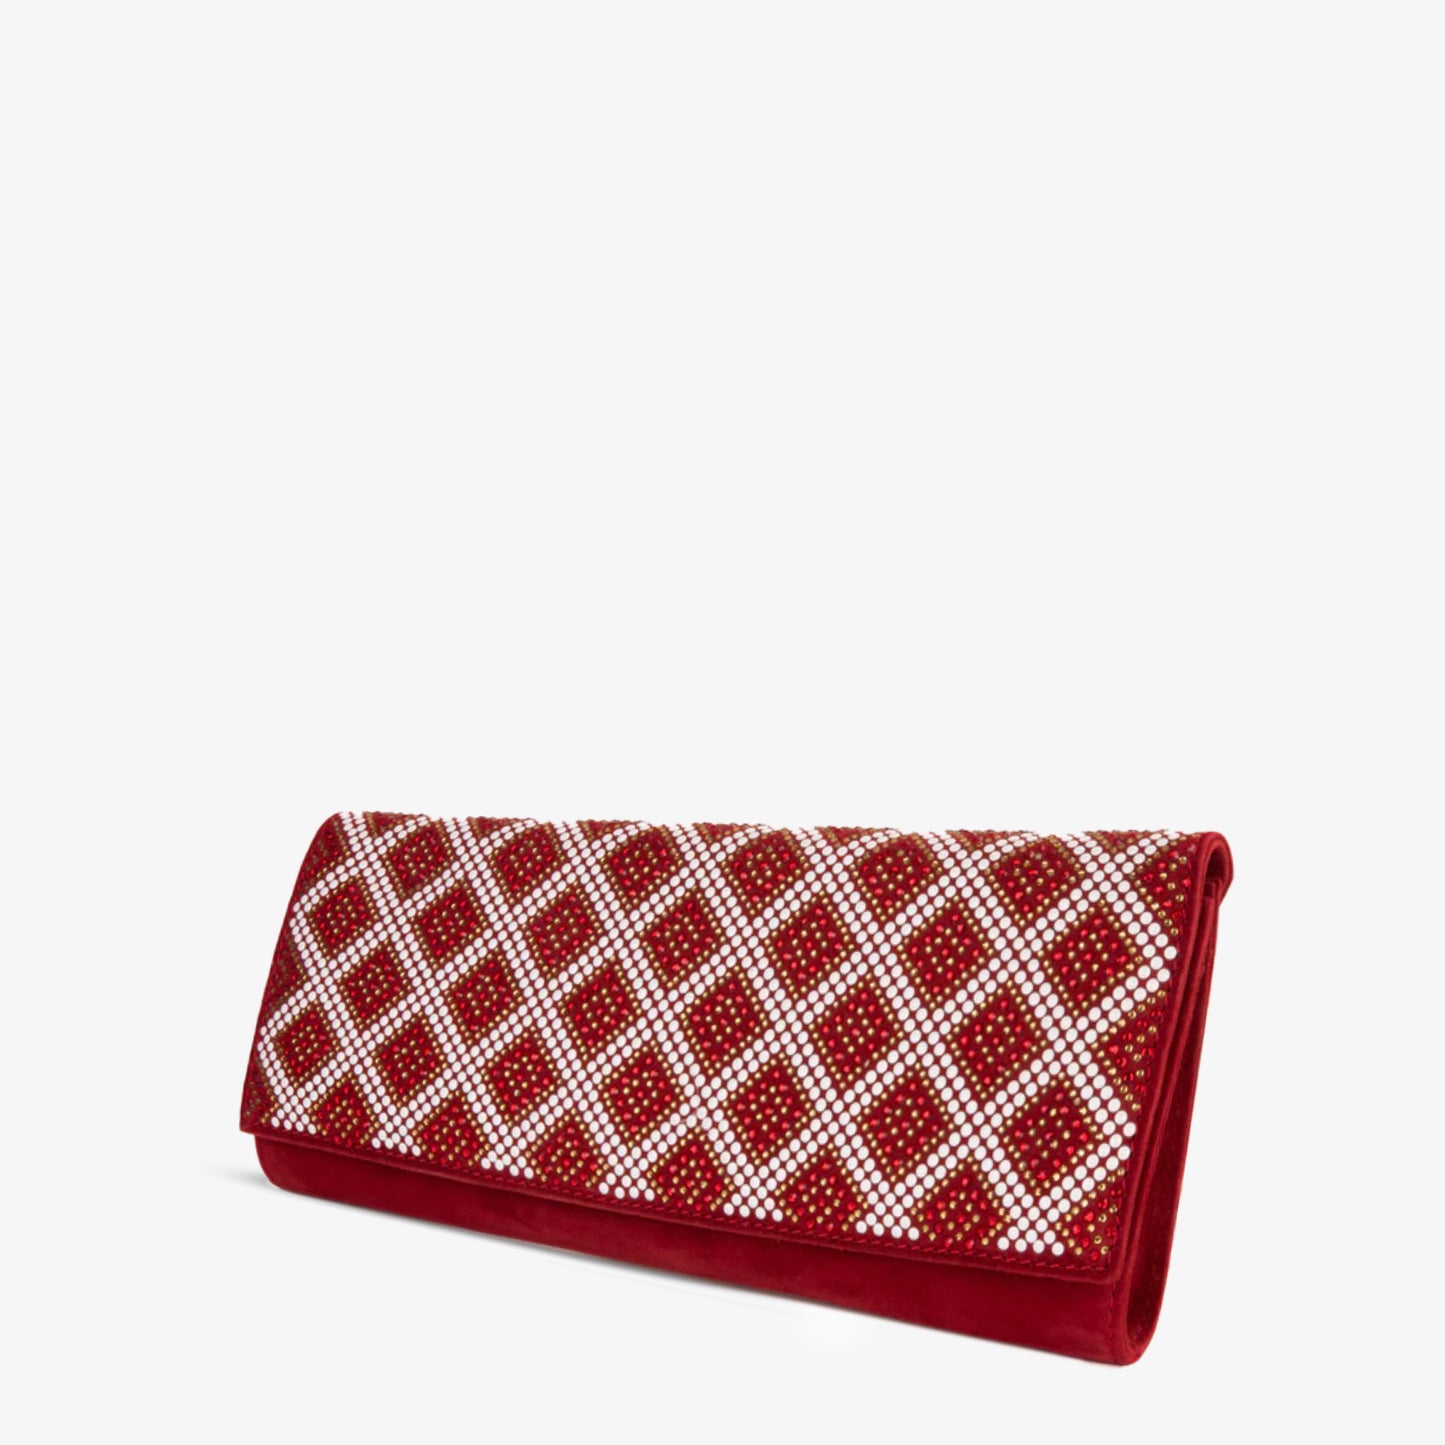 The Nampula Red Glitter Suede Leather Clutch